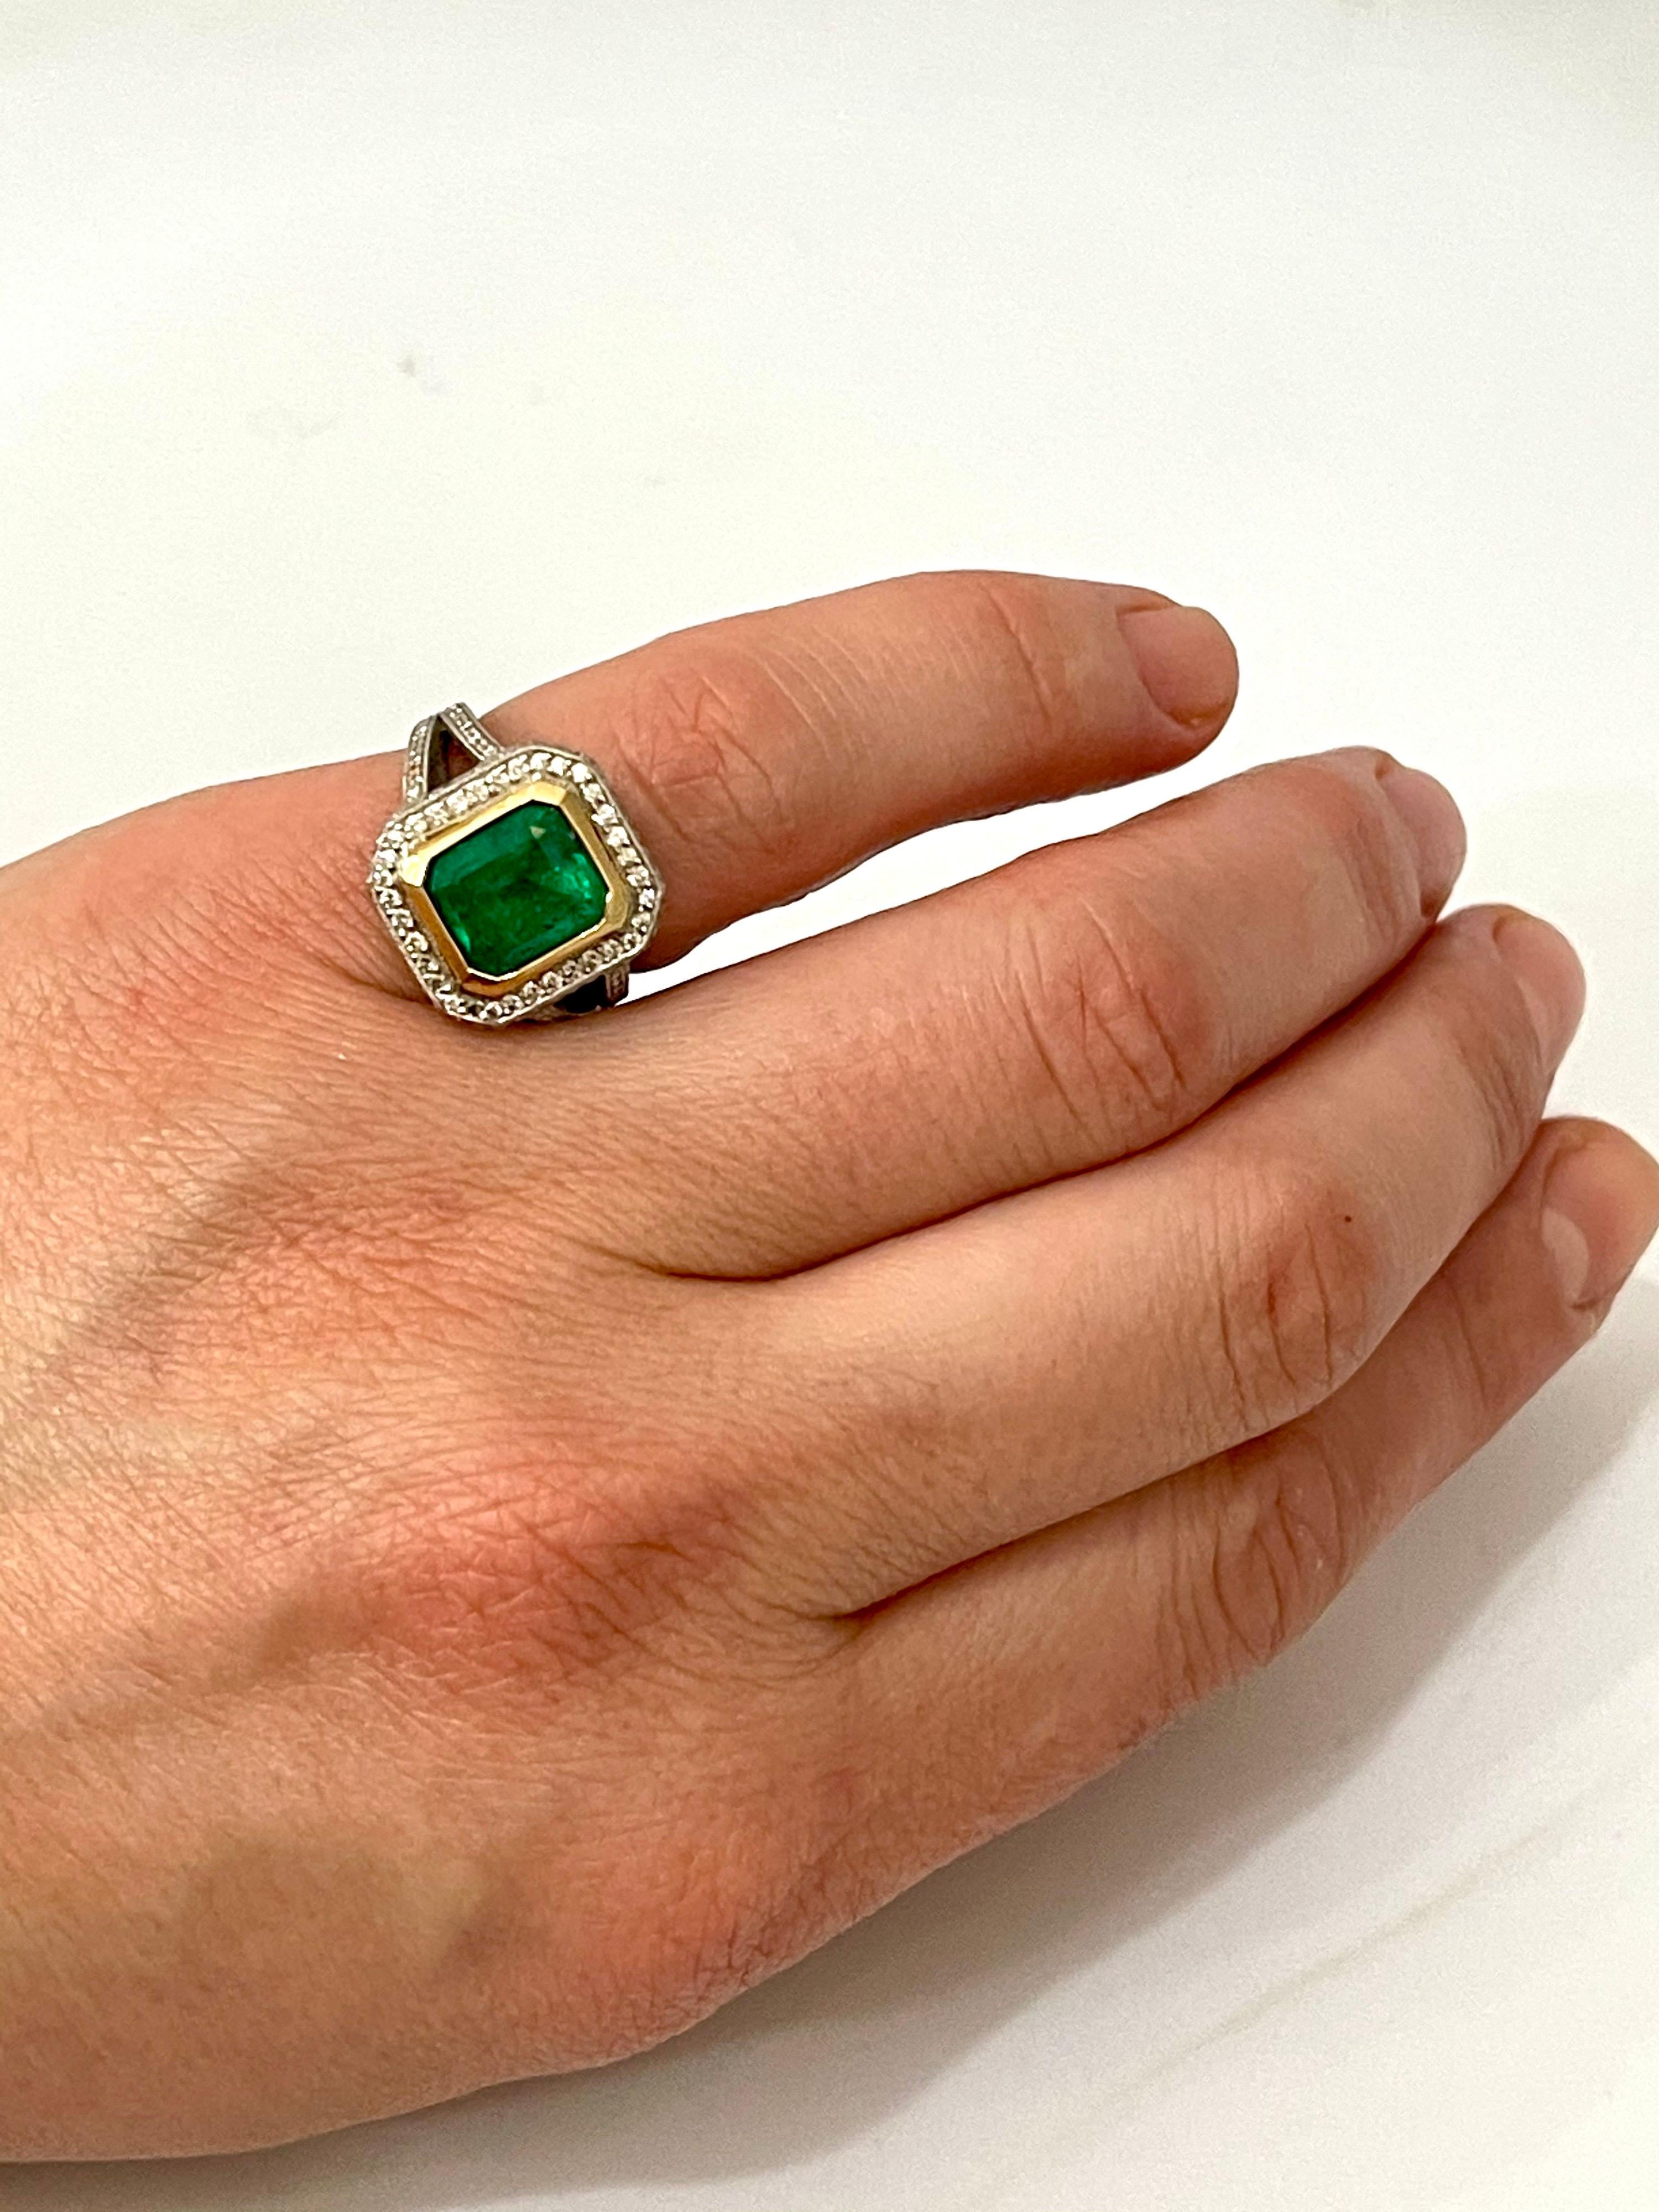 3.8 Carat Emerald Cut Colombian Emerald and Diamond Ring Platinum, Two-Tone 1